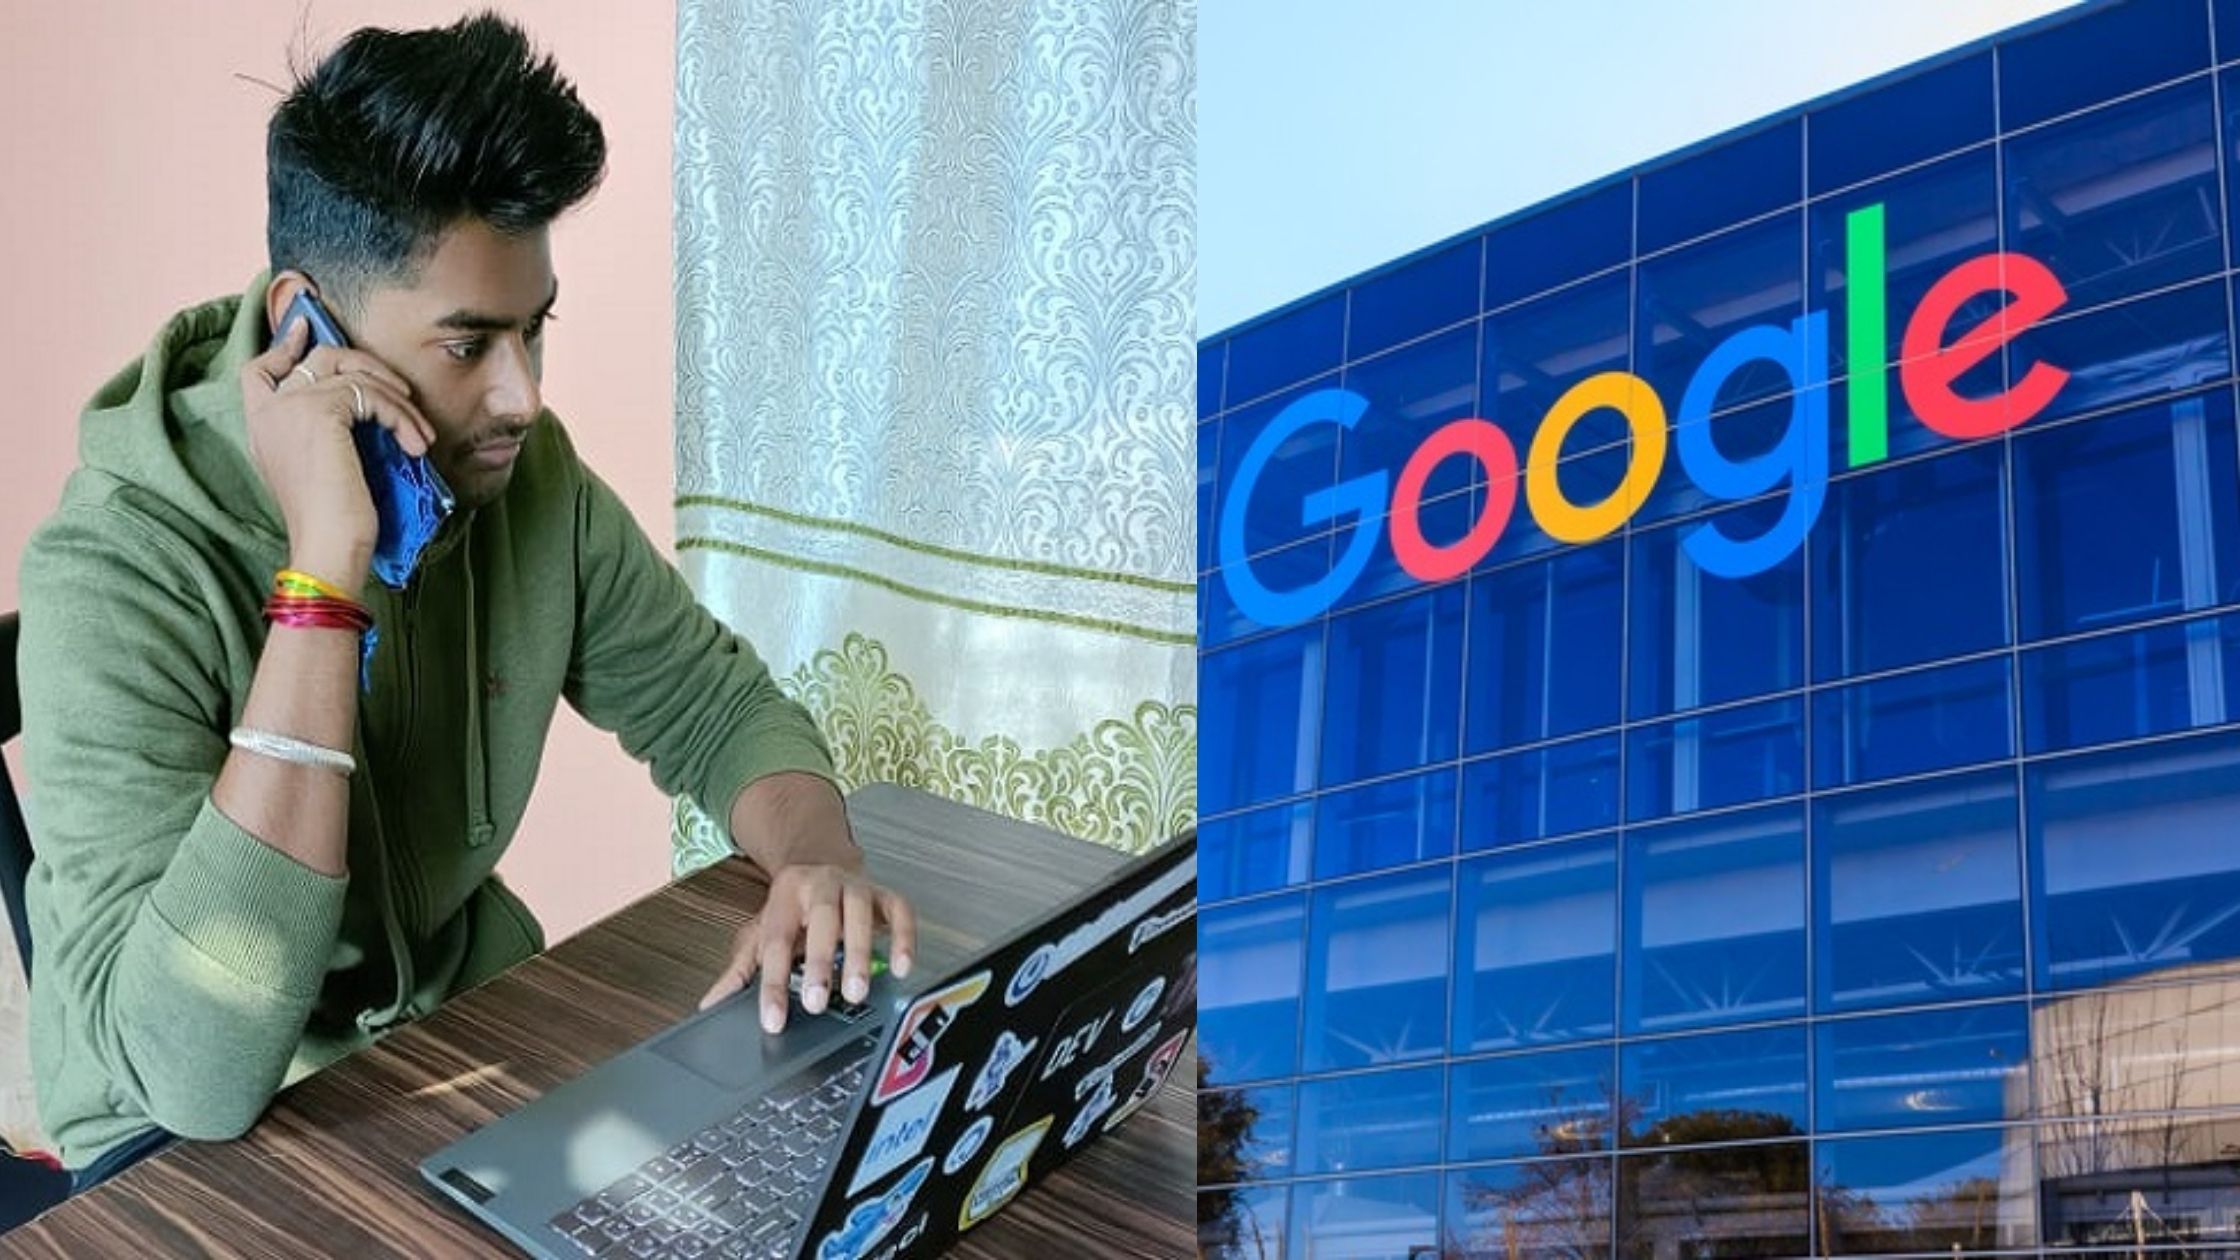 Google included 19-year-old Rituraj from Bihar in the researcher list